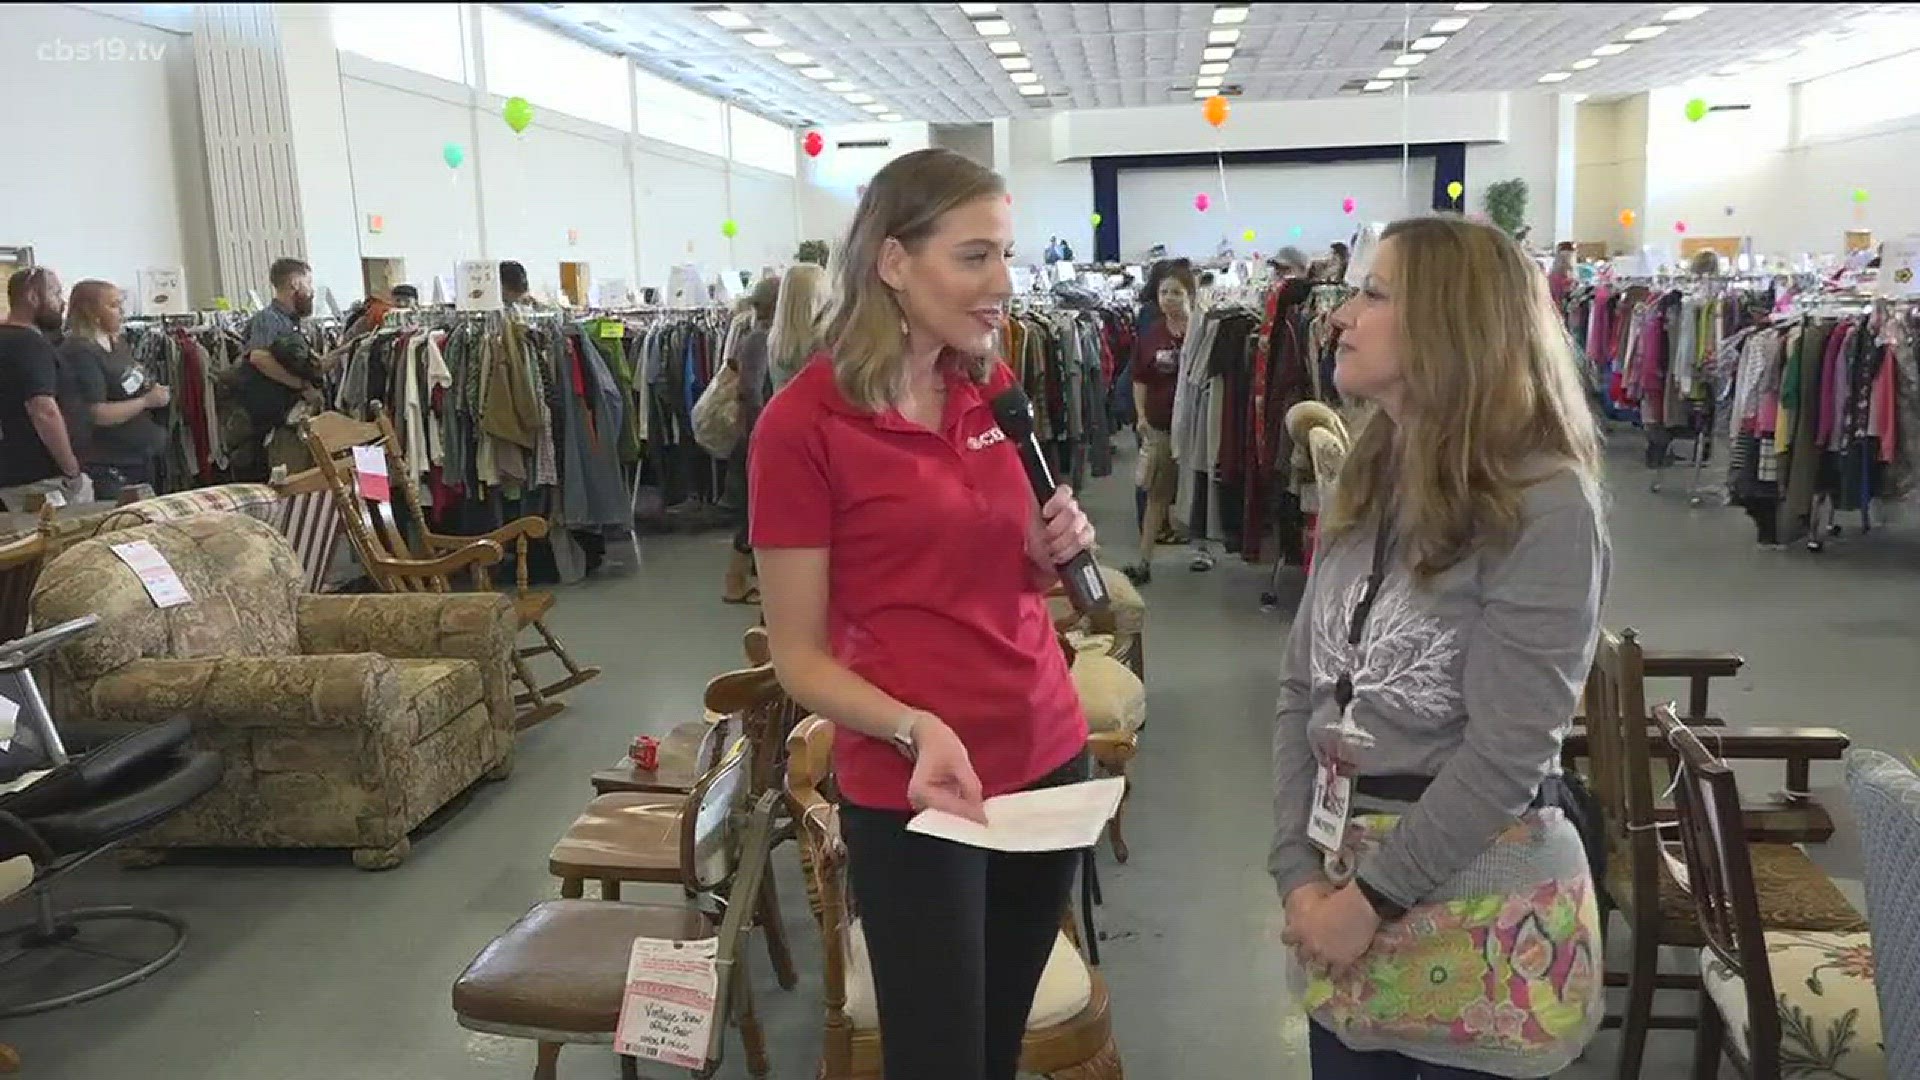 Over 1,400 East Texas families are putting their gently used items up for sale during the Children's Clothing Consignment. Event Coordinator Tess Murphy explains.